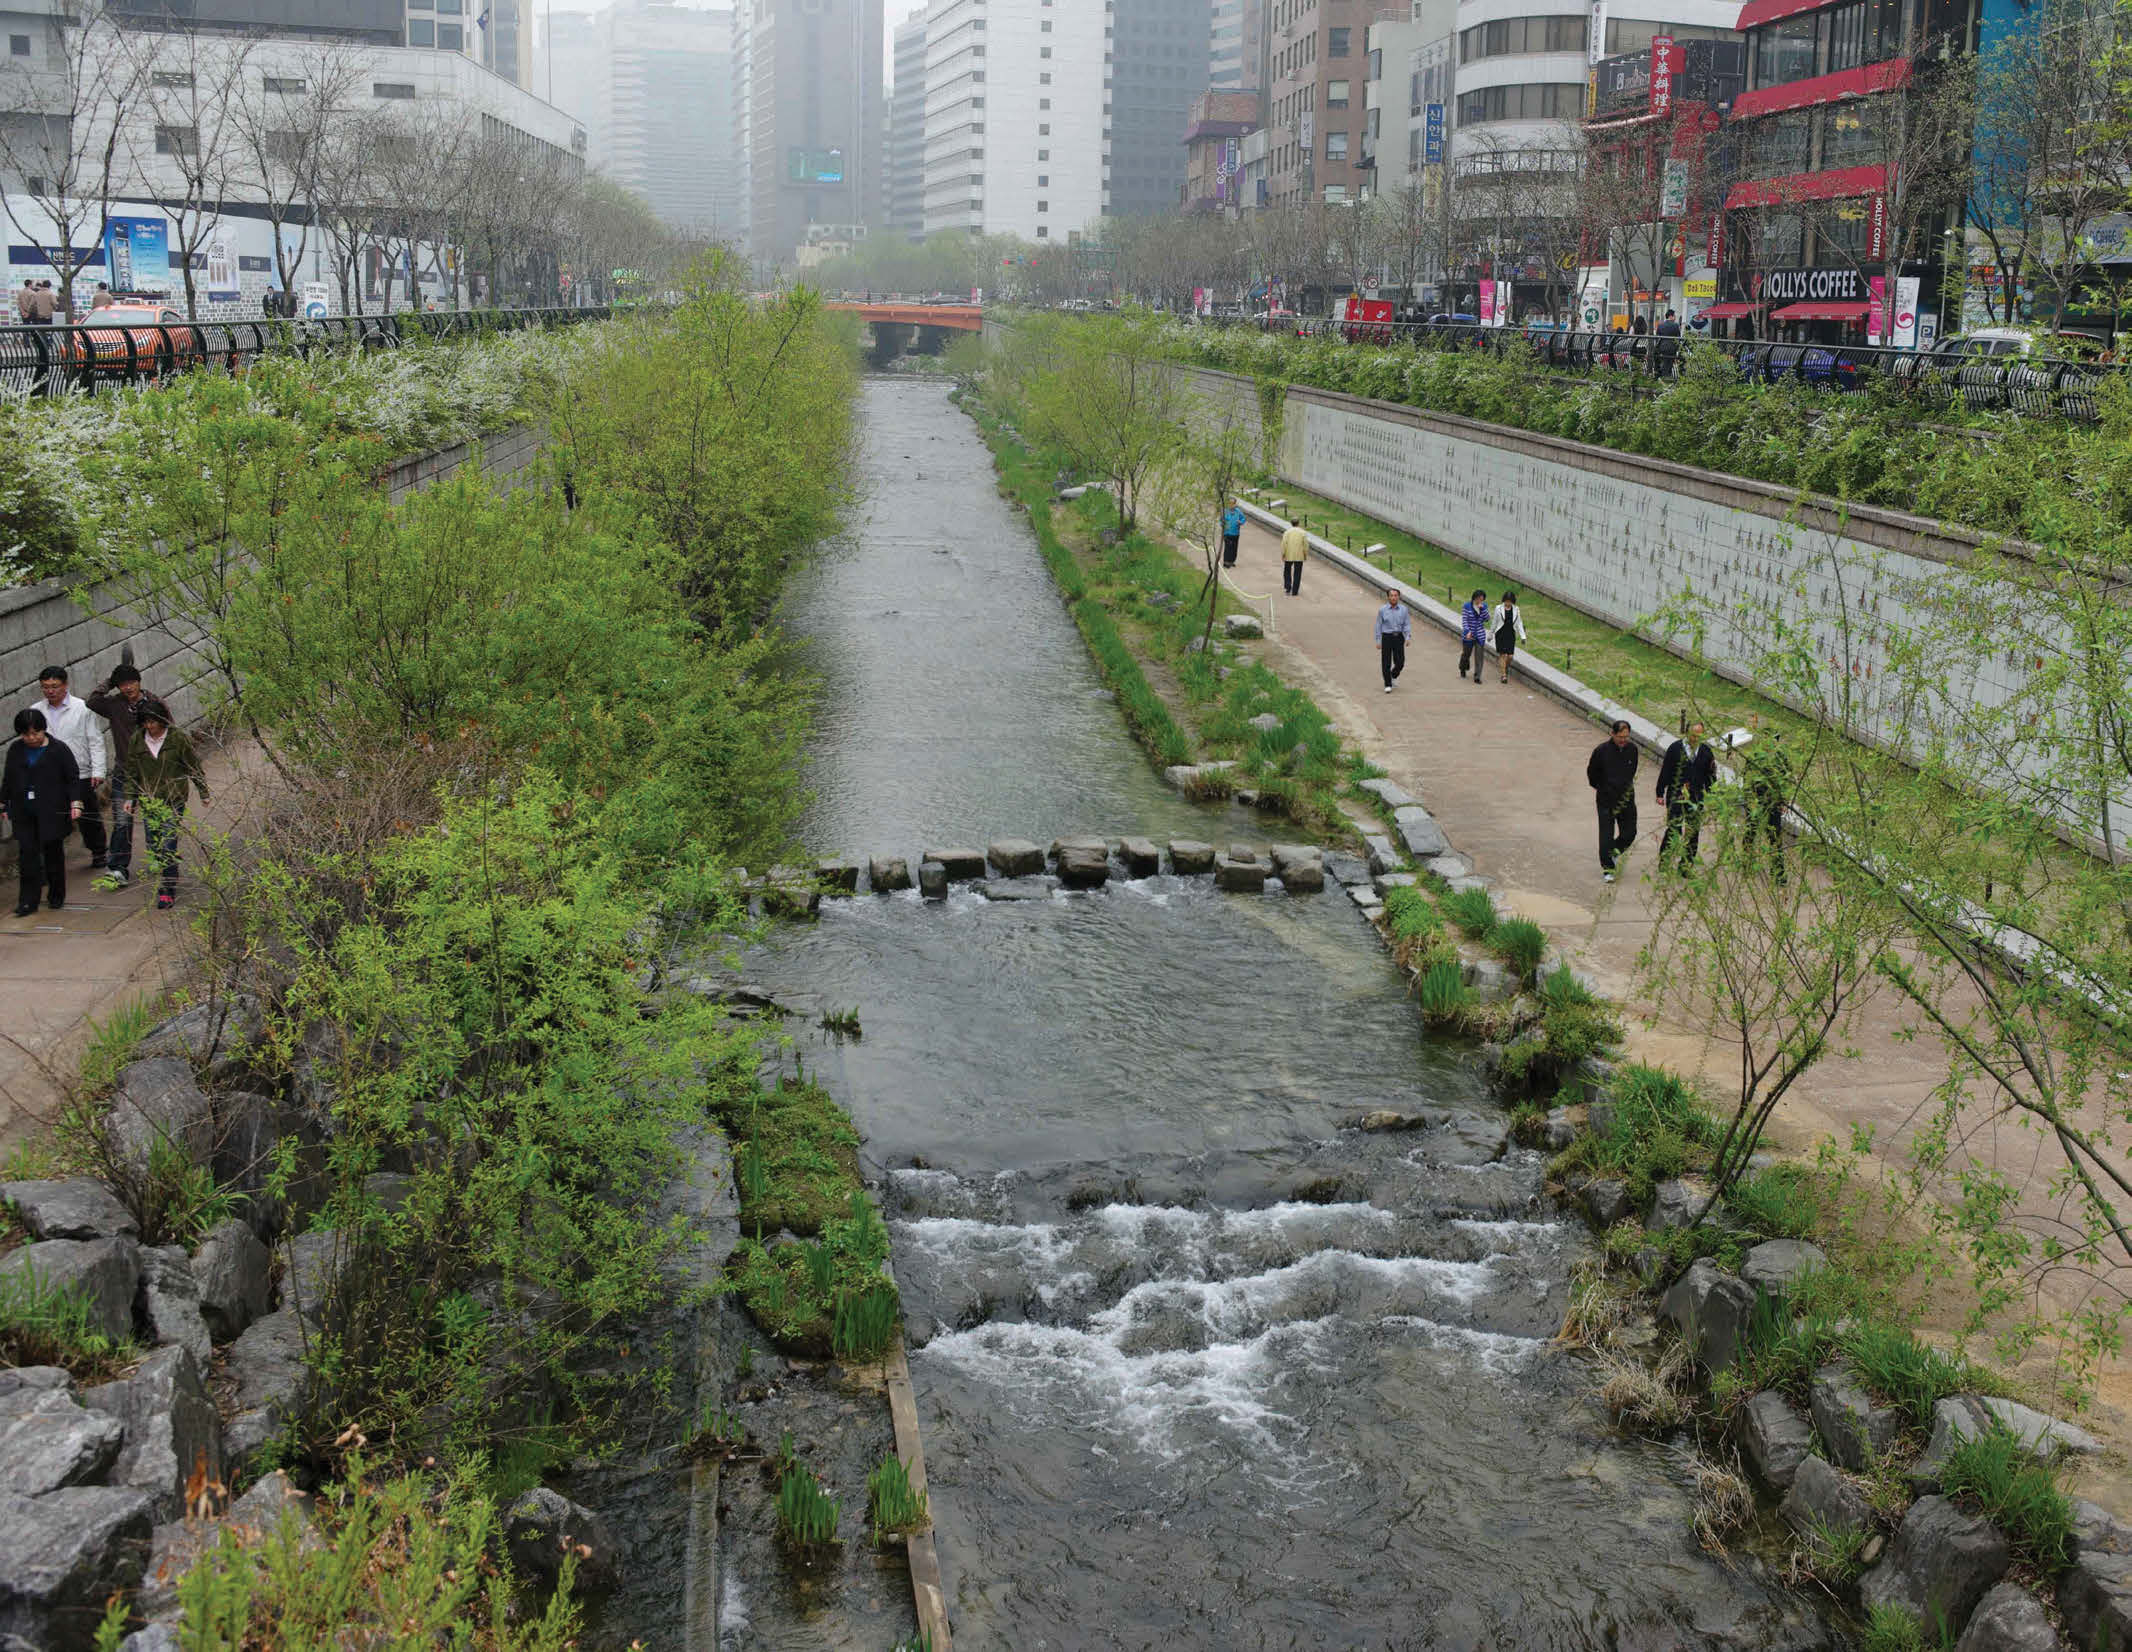 The Cheonggyecheon River park in Seoul